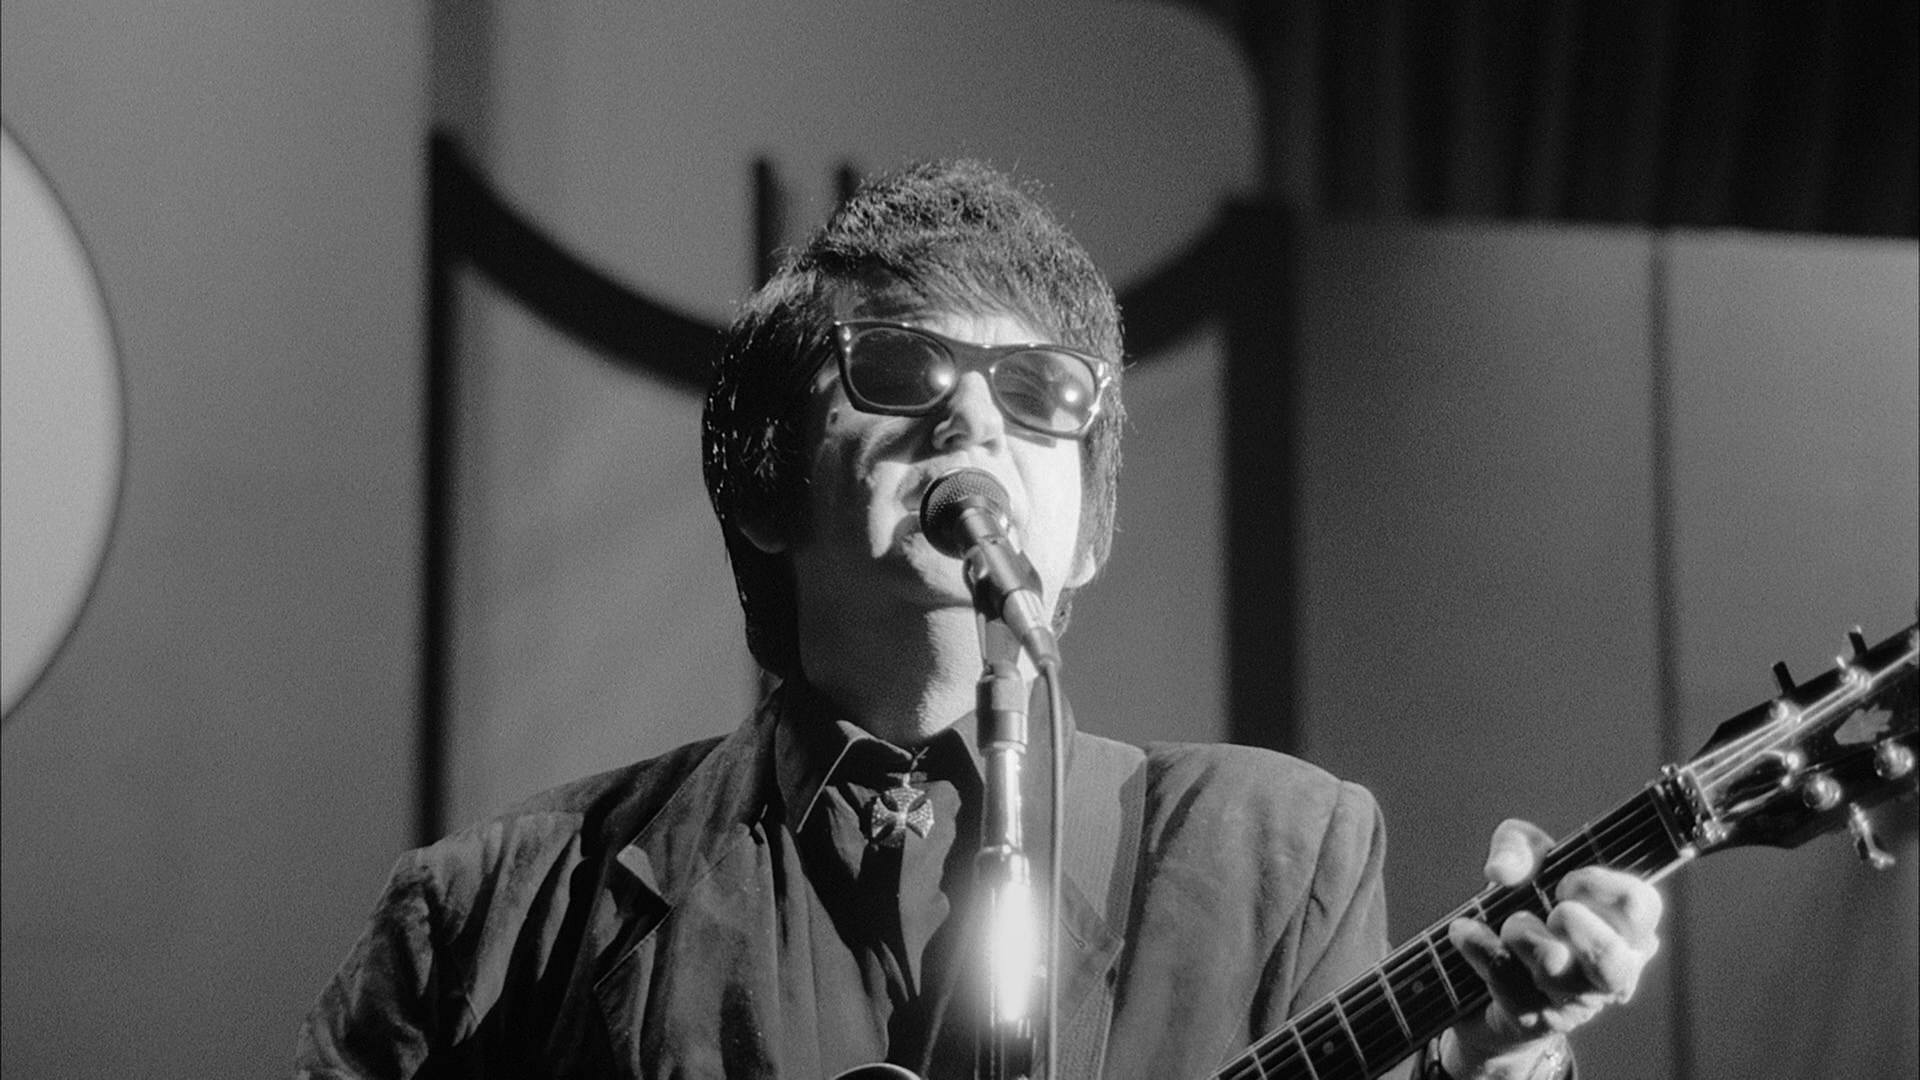 00000.m2ts(ROY_ORBISON_BW_NIGHT_30)_20180121_120400.040.png